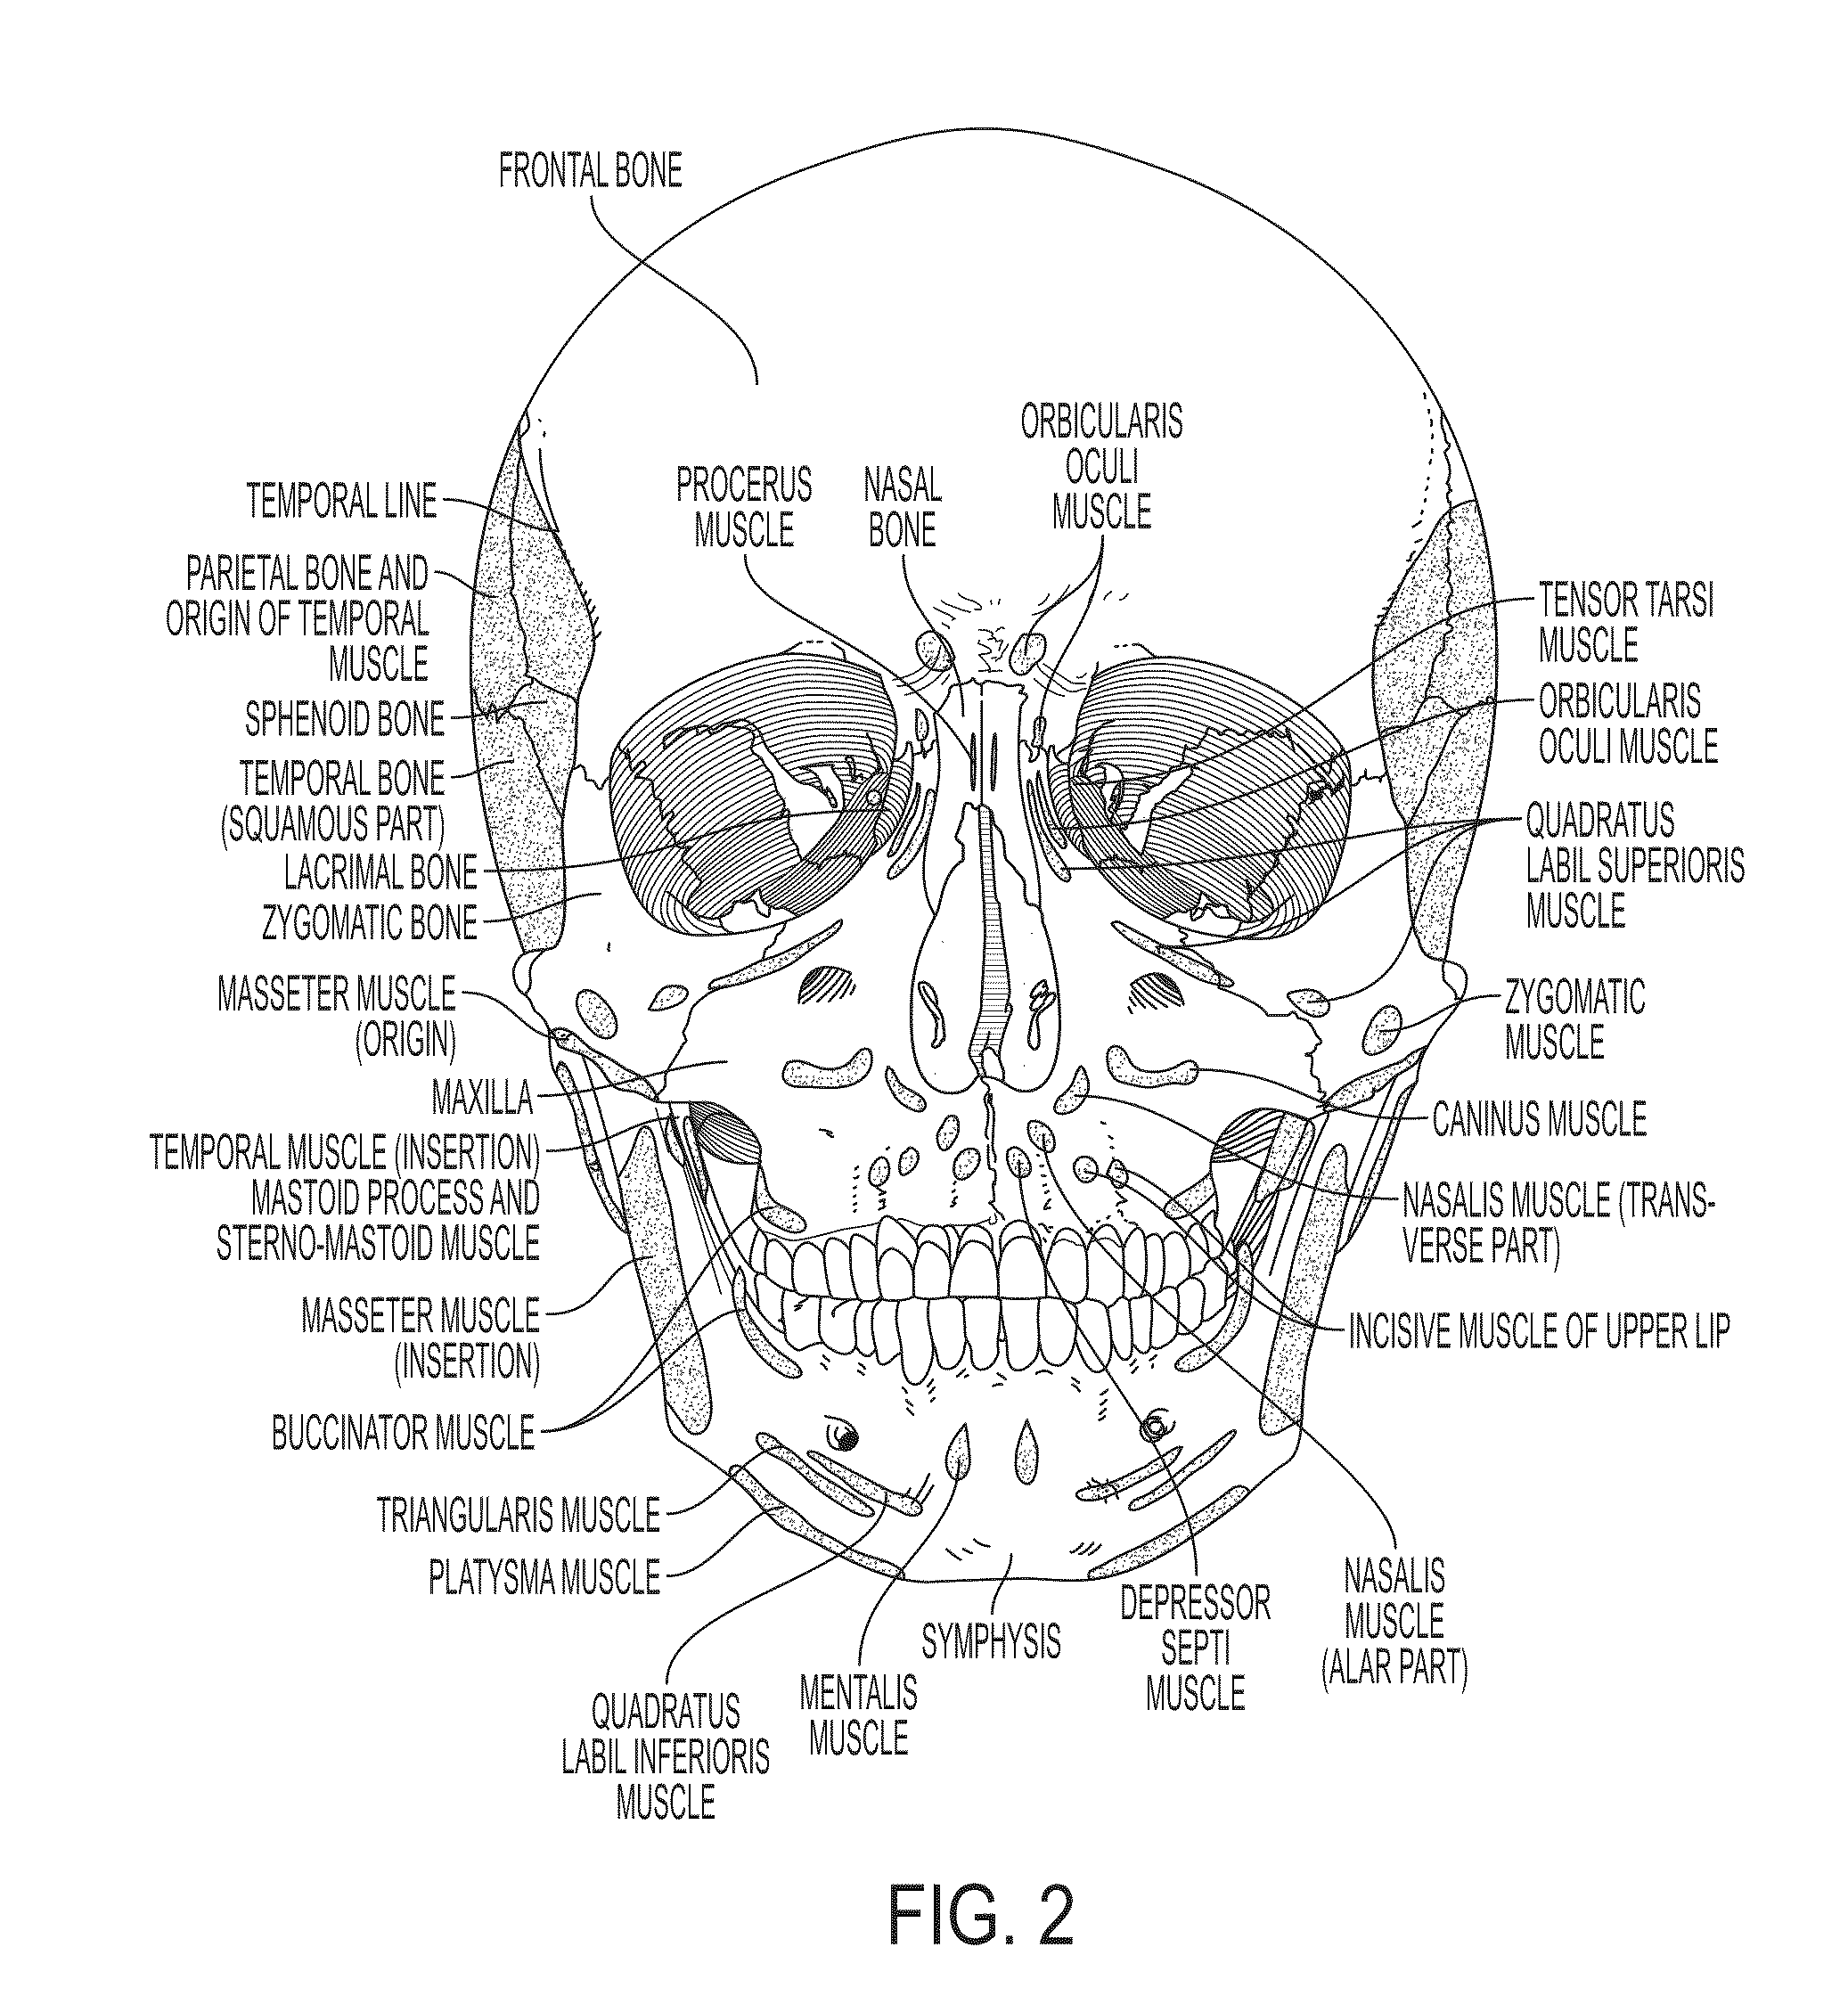 Submuscular Facial Fixation (Myo-Osseous Fixation) Using Microincision Microscrew Device, Injectable Glues and Adhesives, and Method and Device for Therapy of Migraine and Related Headaches